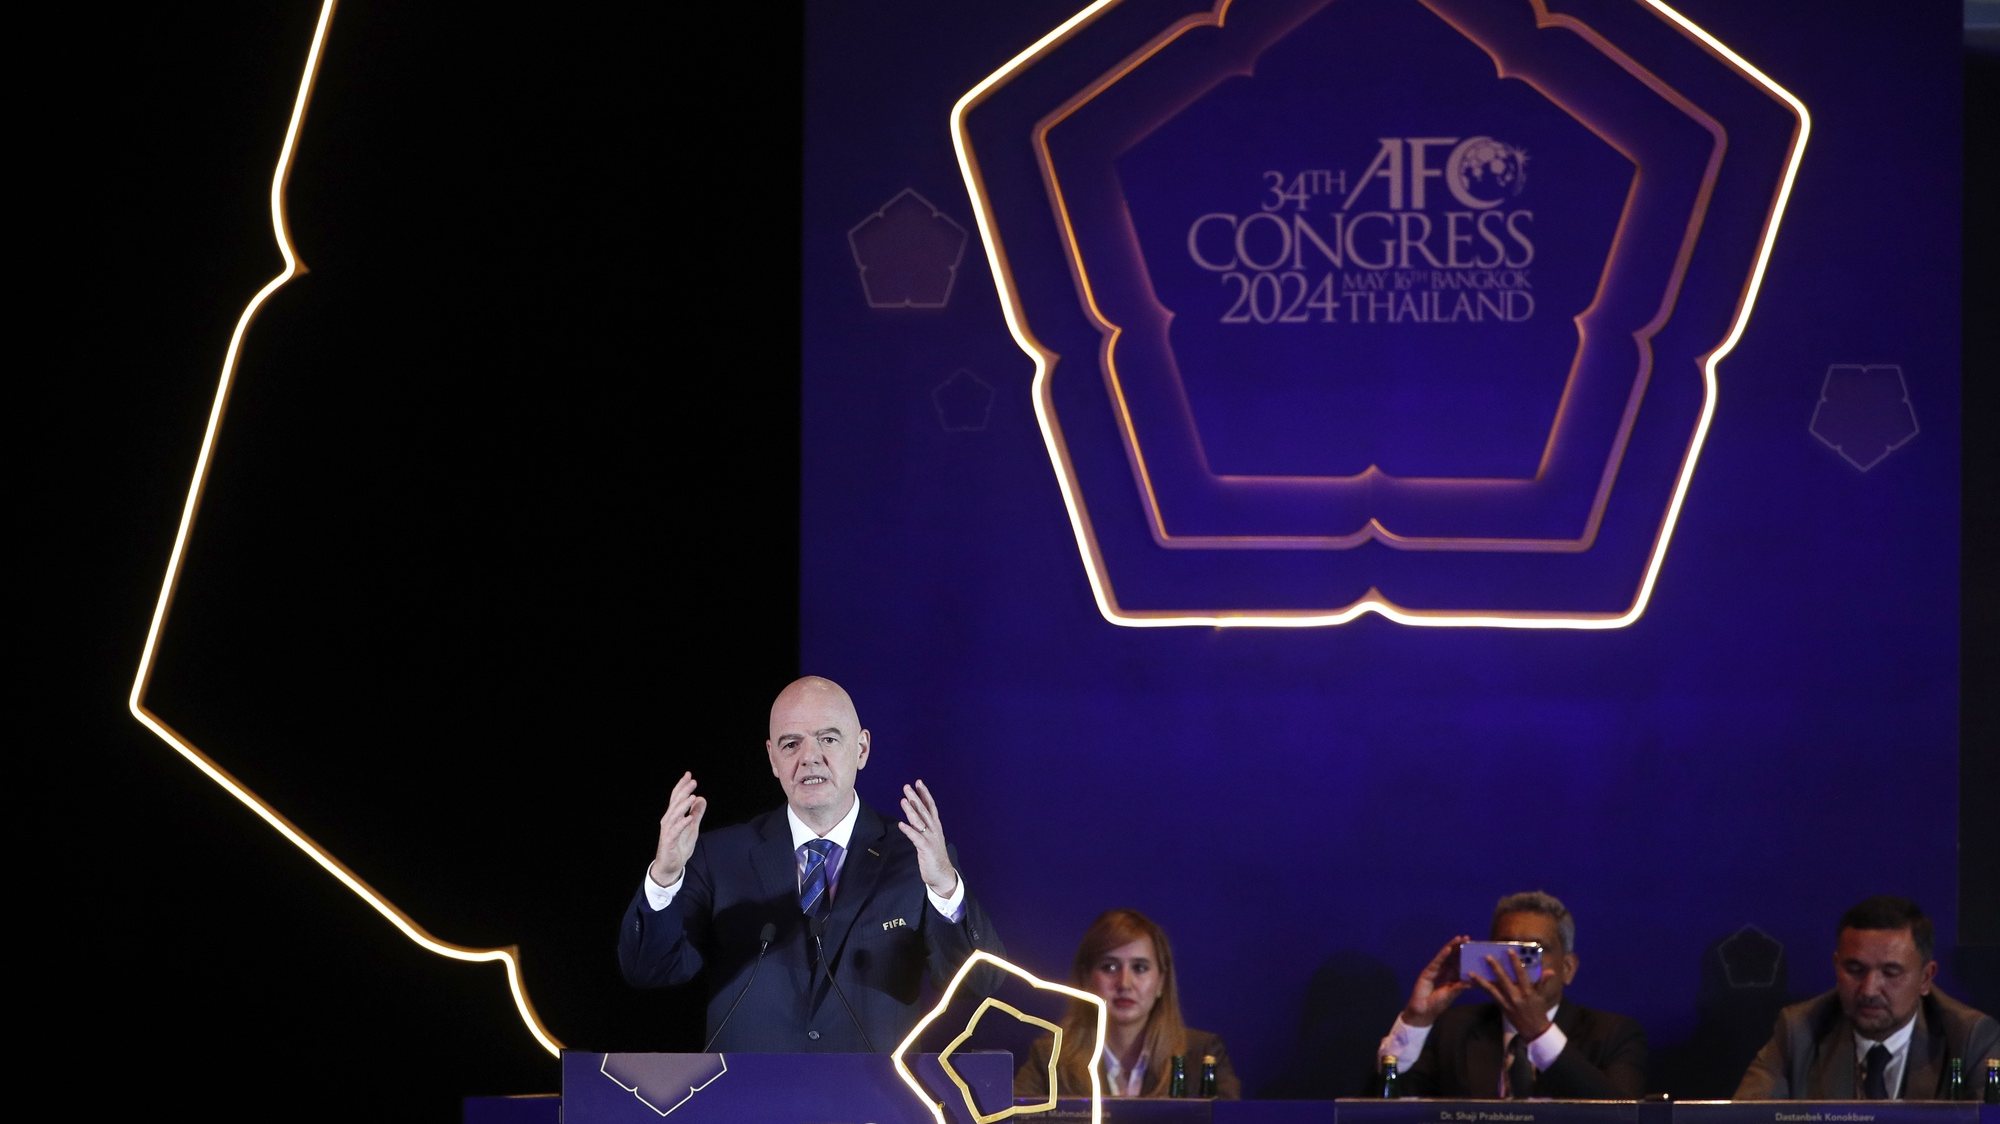 epa11343812 FIFA President Gianni Infantino delivers a speech during the 34th Congress of the Asian Football Confederation (AFC) in Bangkok, Thailand, 16 May 2024. The Asian Football Confederation (AFC) held its 34th Congress in Bangkok to elect two new members for two positions, Female Executive Committee Member Central Zone and AFC Executive Committee Member East Zone to the AFC Executive Committee, for the remainder of 2023 to 2027 term.  EPA/RUNGROJ YONGRIT